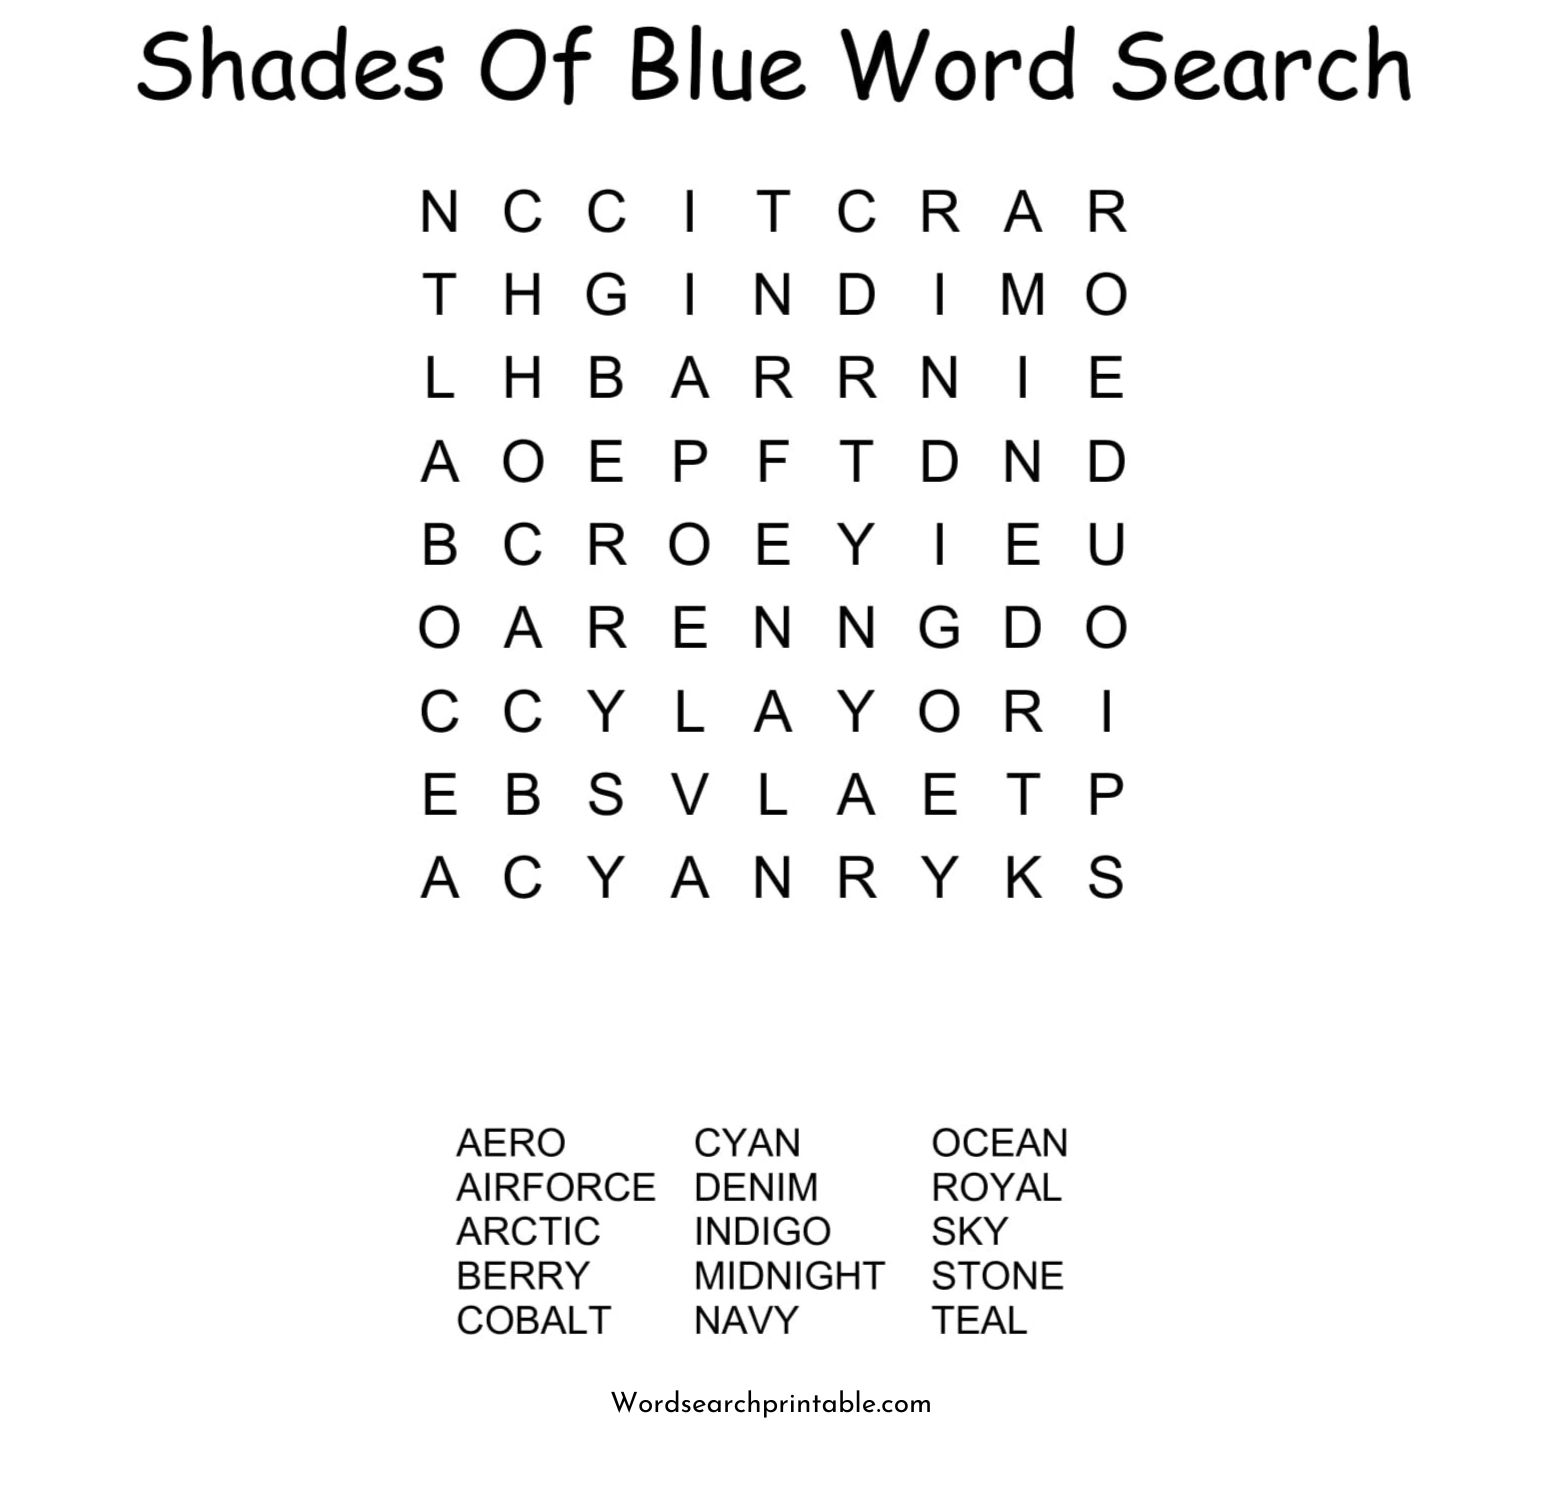 shades of blue word search puzzle